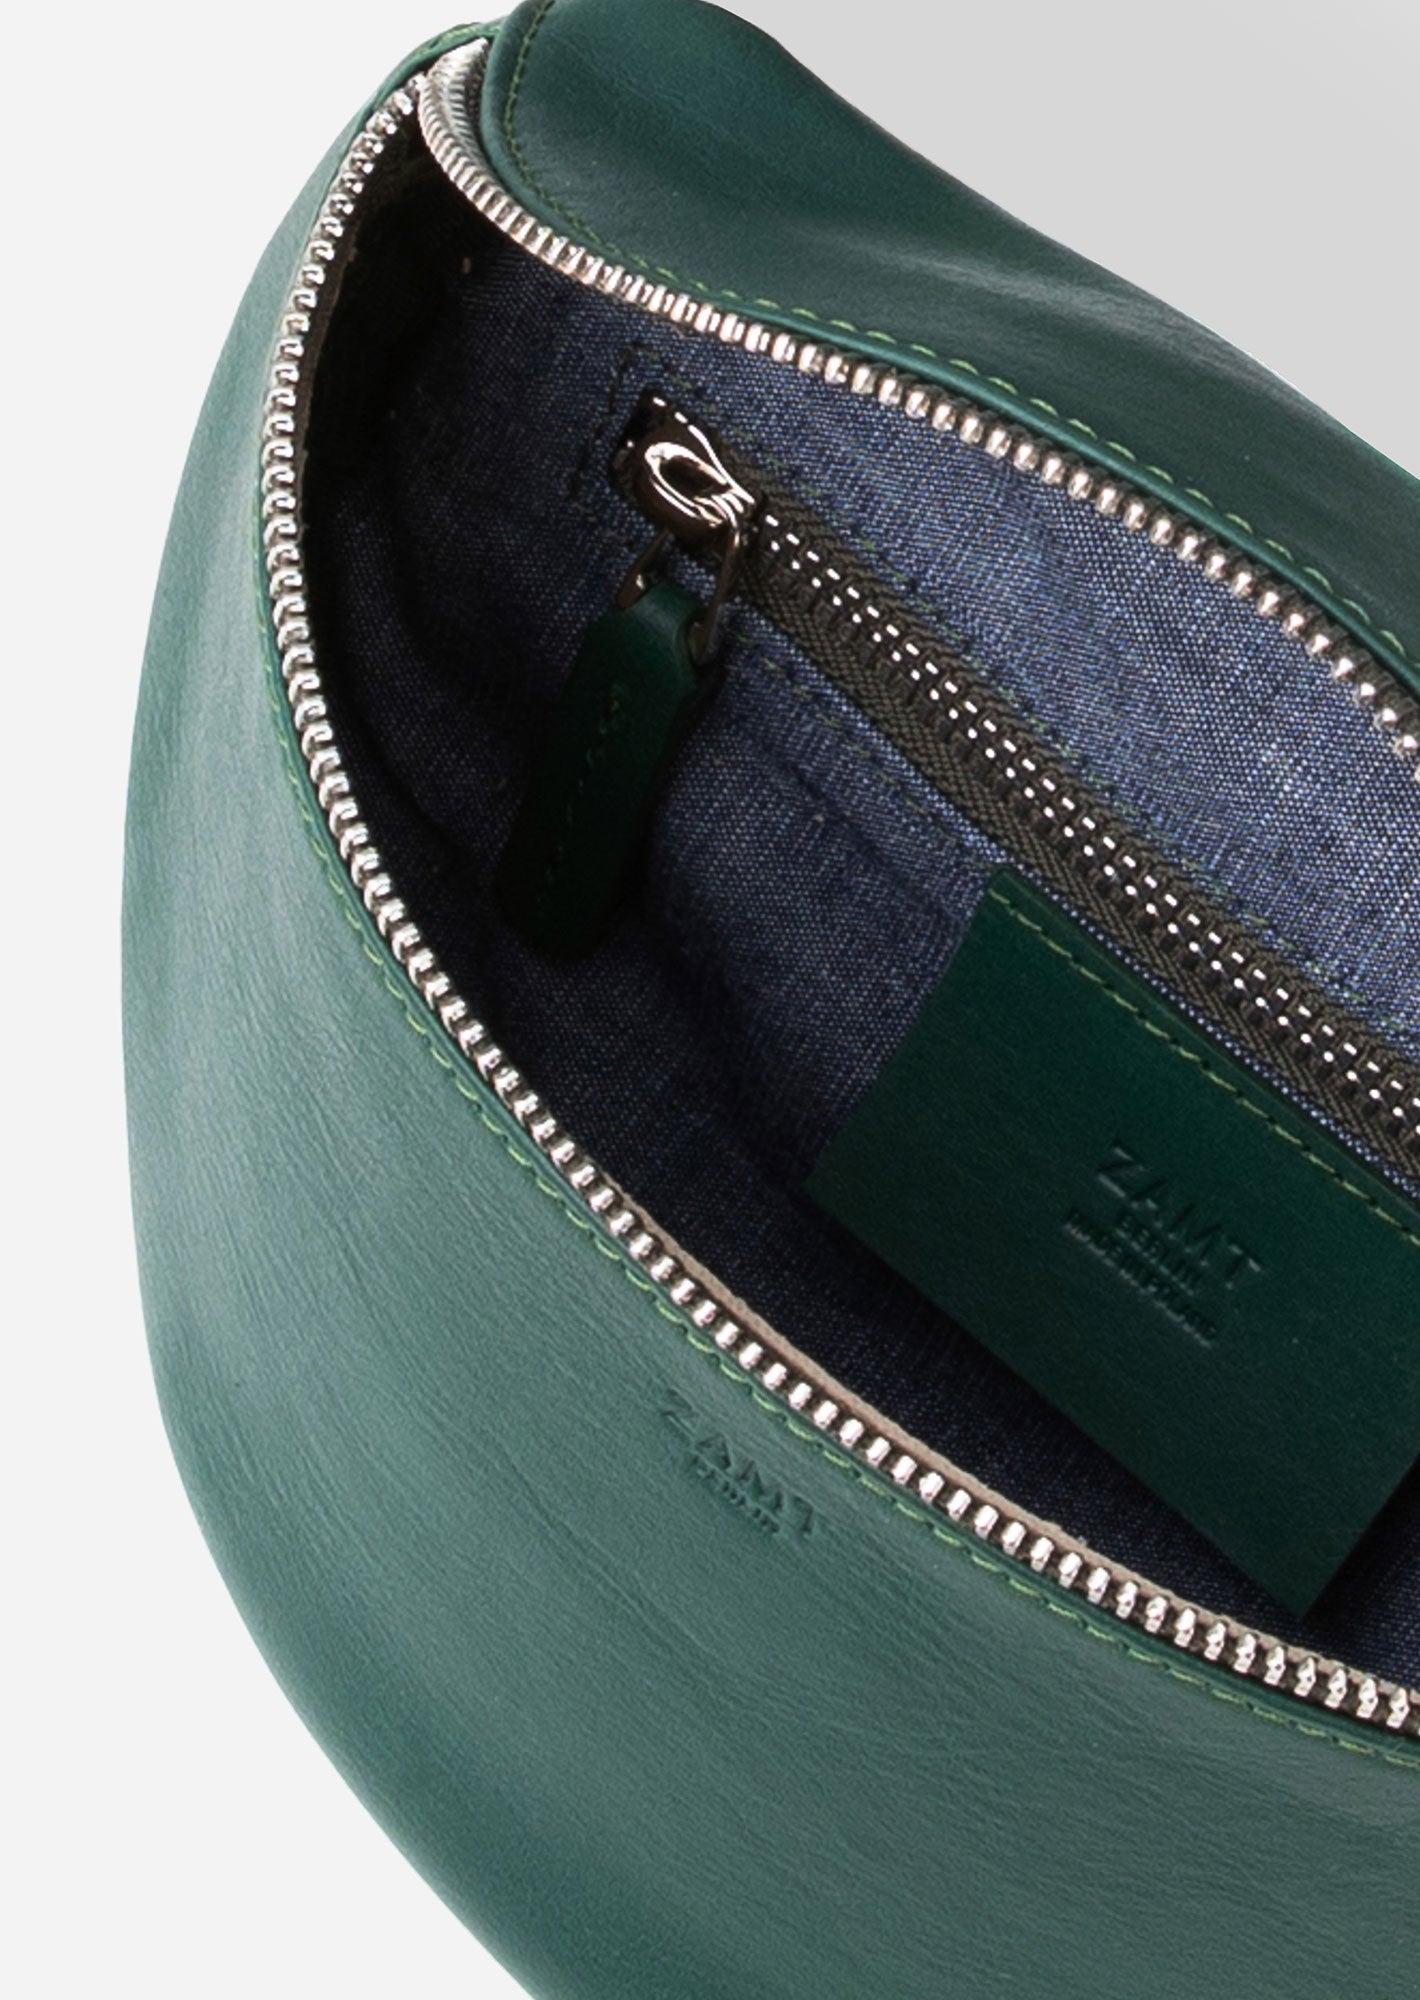 HIP_BAG_CAN_Green_Designed_in_Berlin_Made_to_last_Handmade_in_Poland.